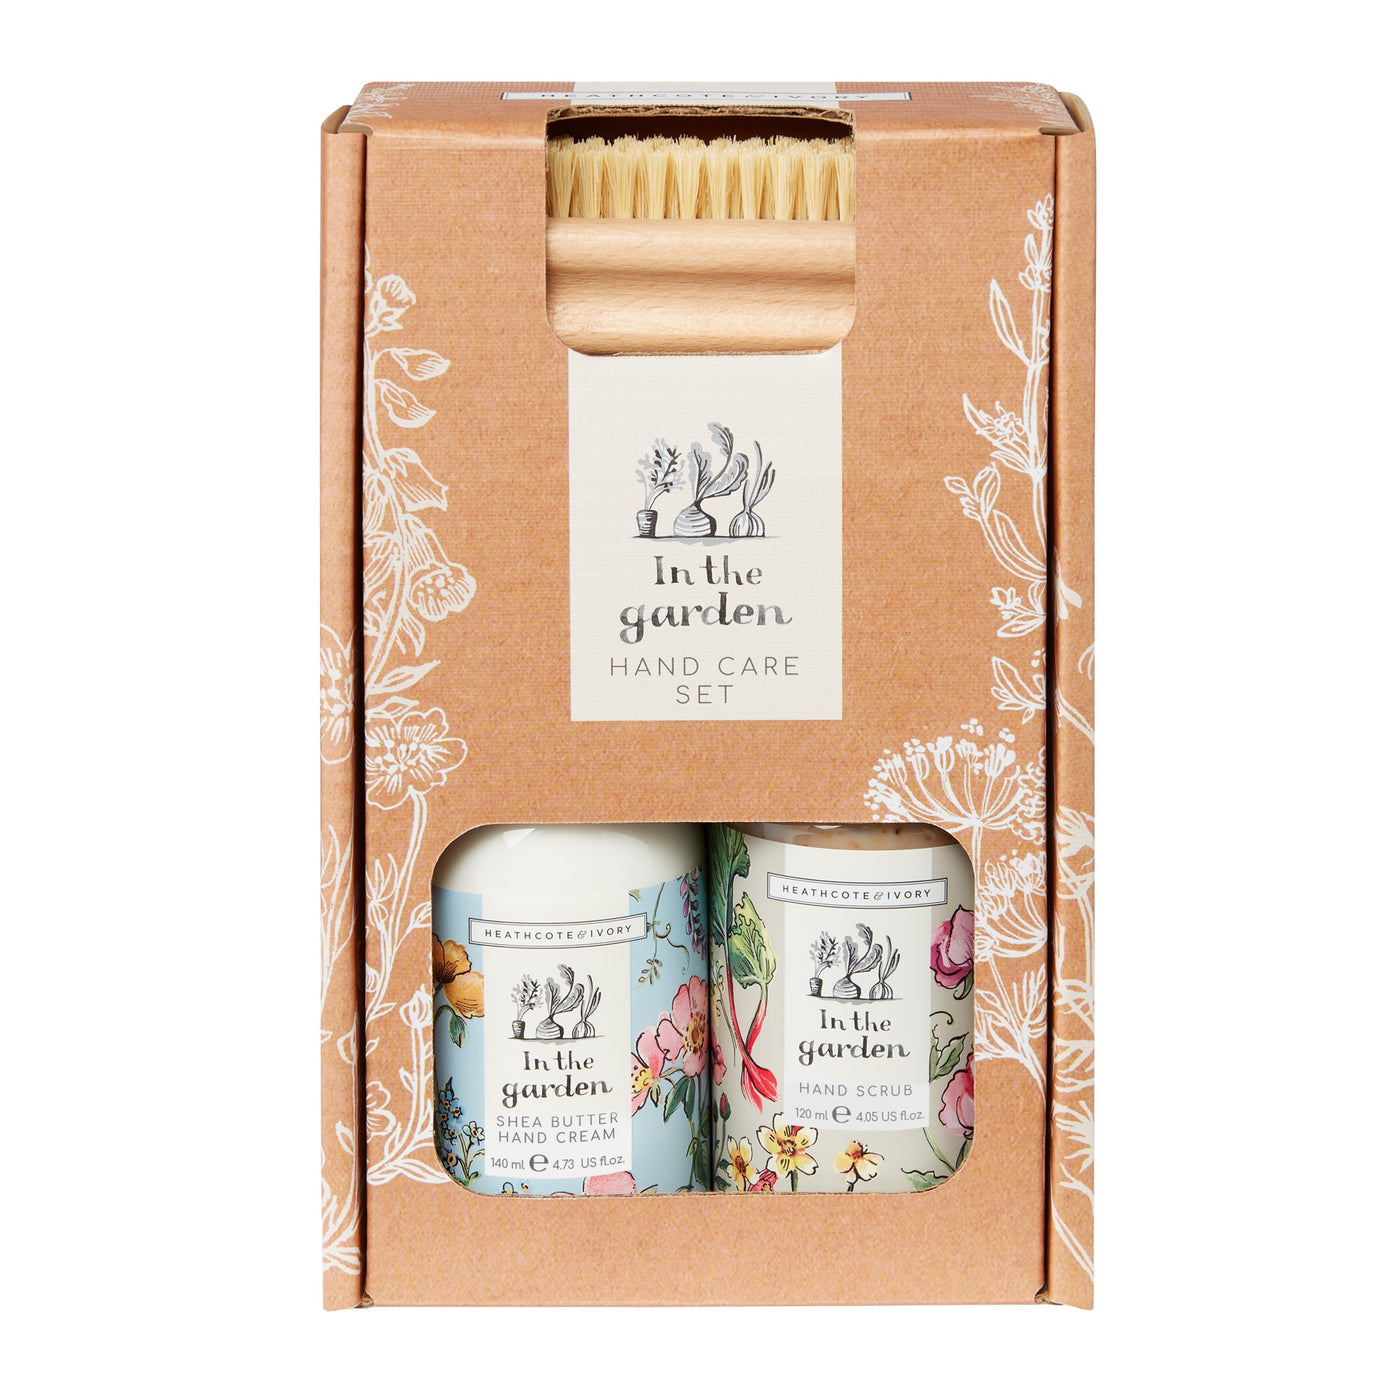 In The Garden Hand Care Set - Heathcote & Ivory